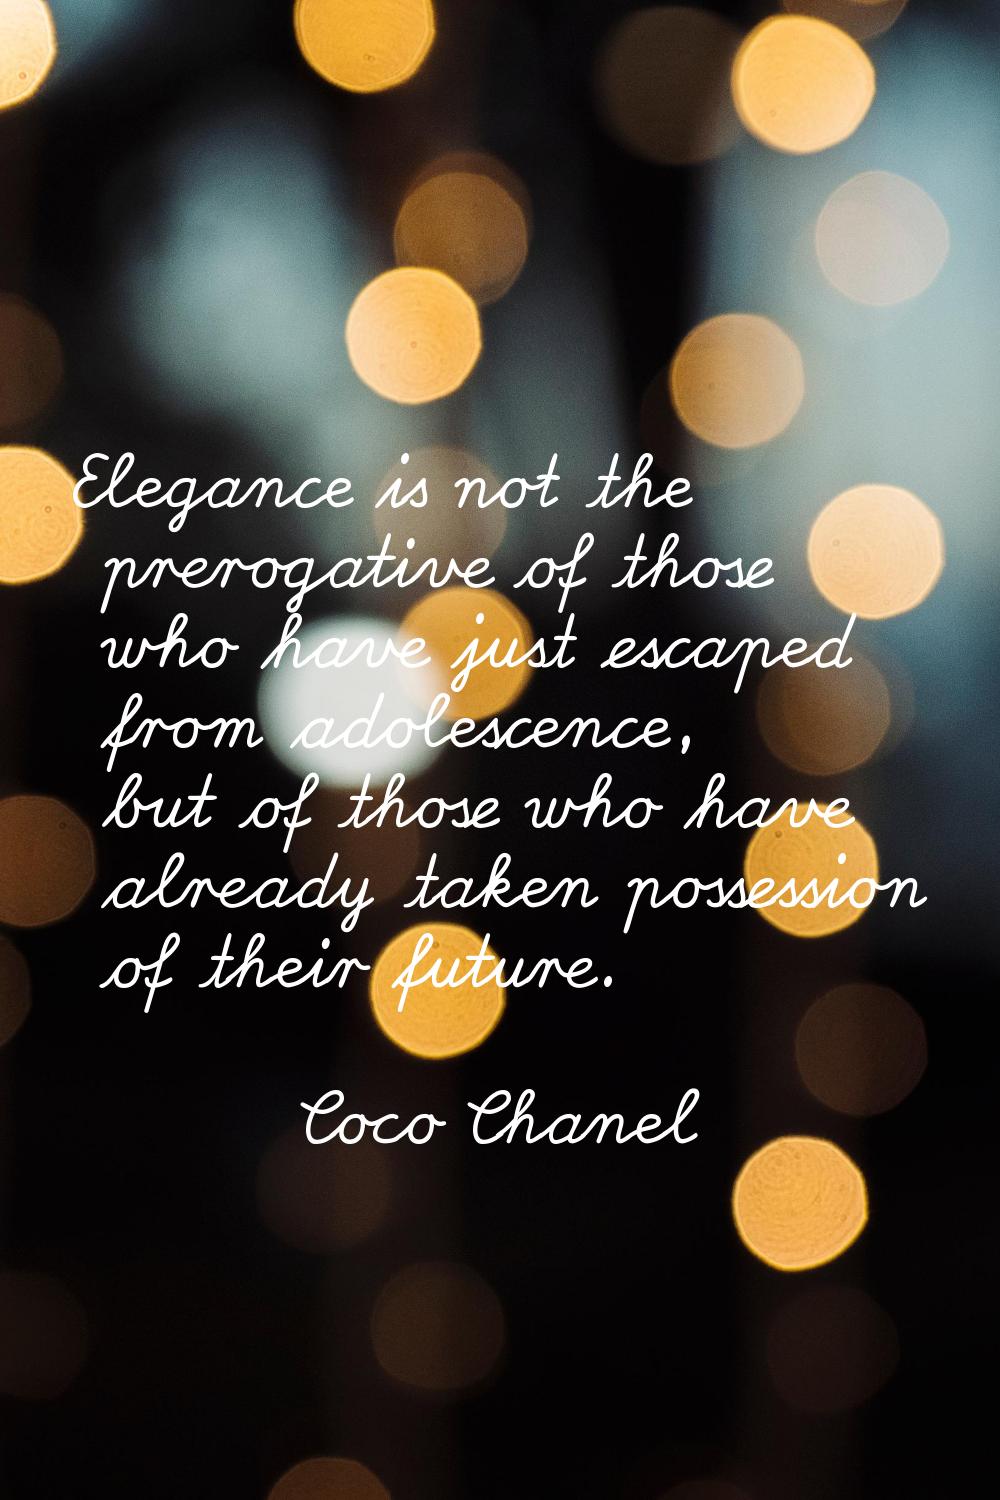 Elegance is not the prerogative of those who have just escaped from adolescence, but of those who h